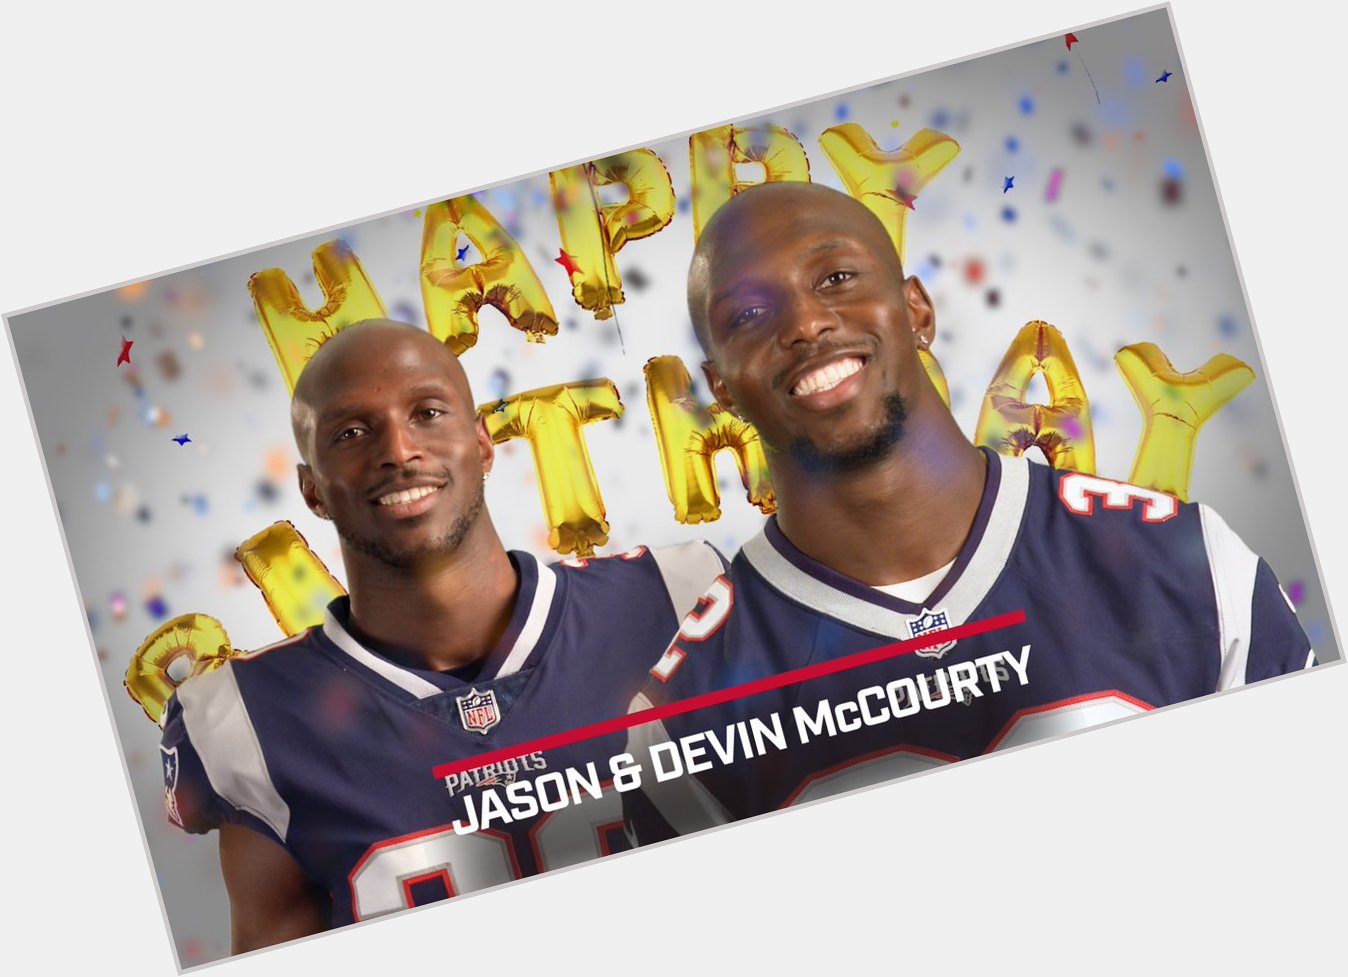 Fellow Patriot teammates and their \twins\ wish Devin and Jason McCourty a Happy Birthday!  